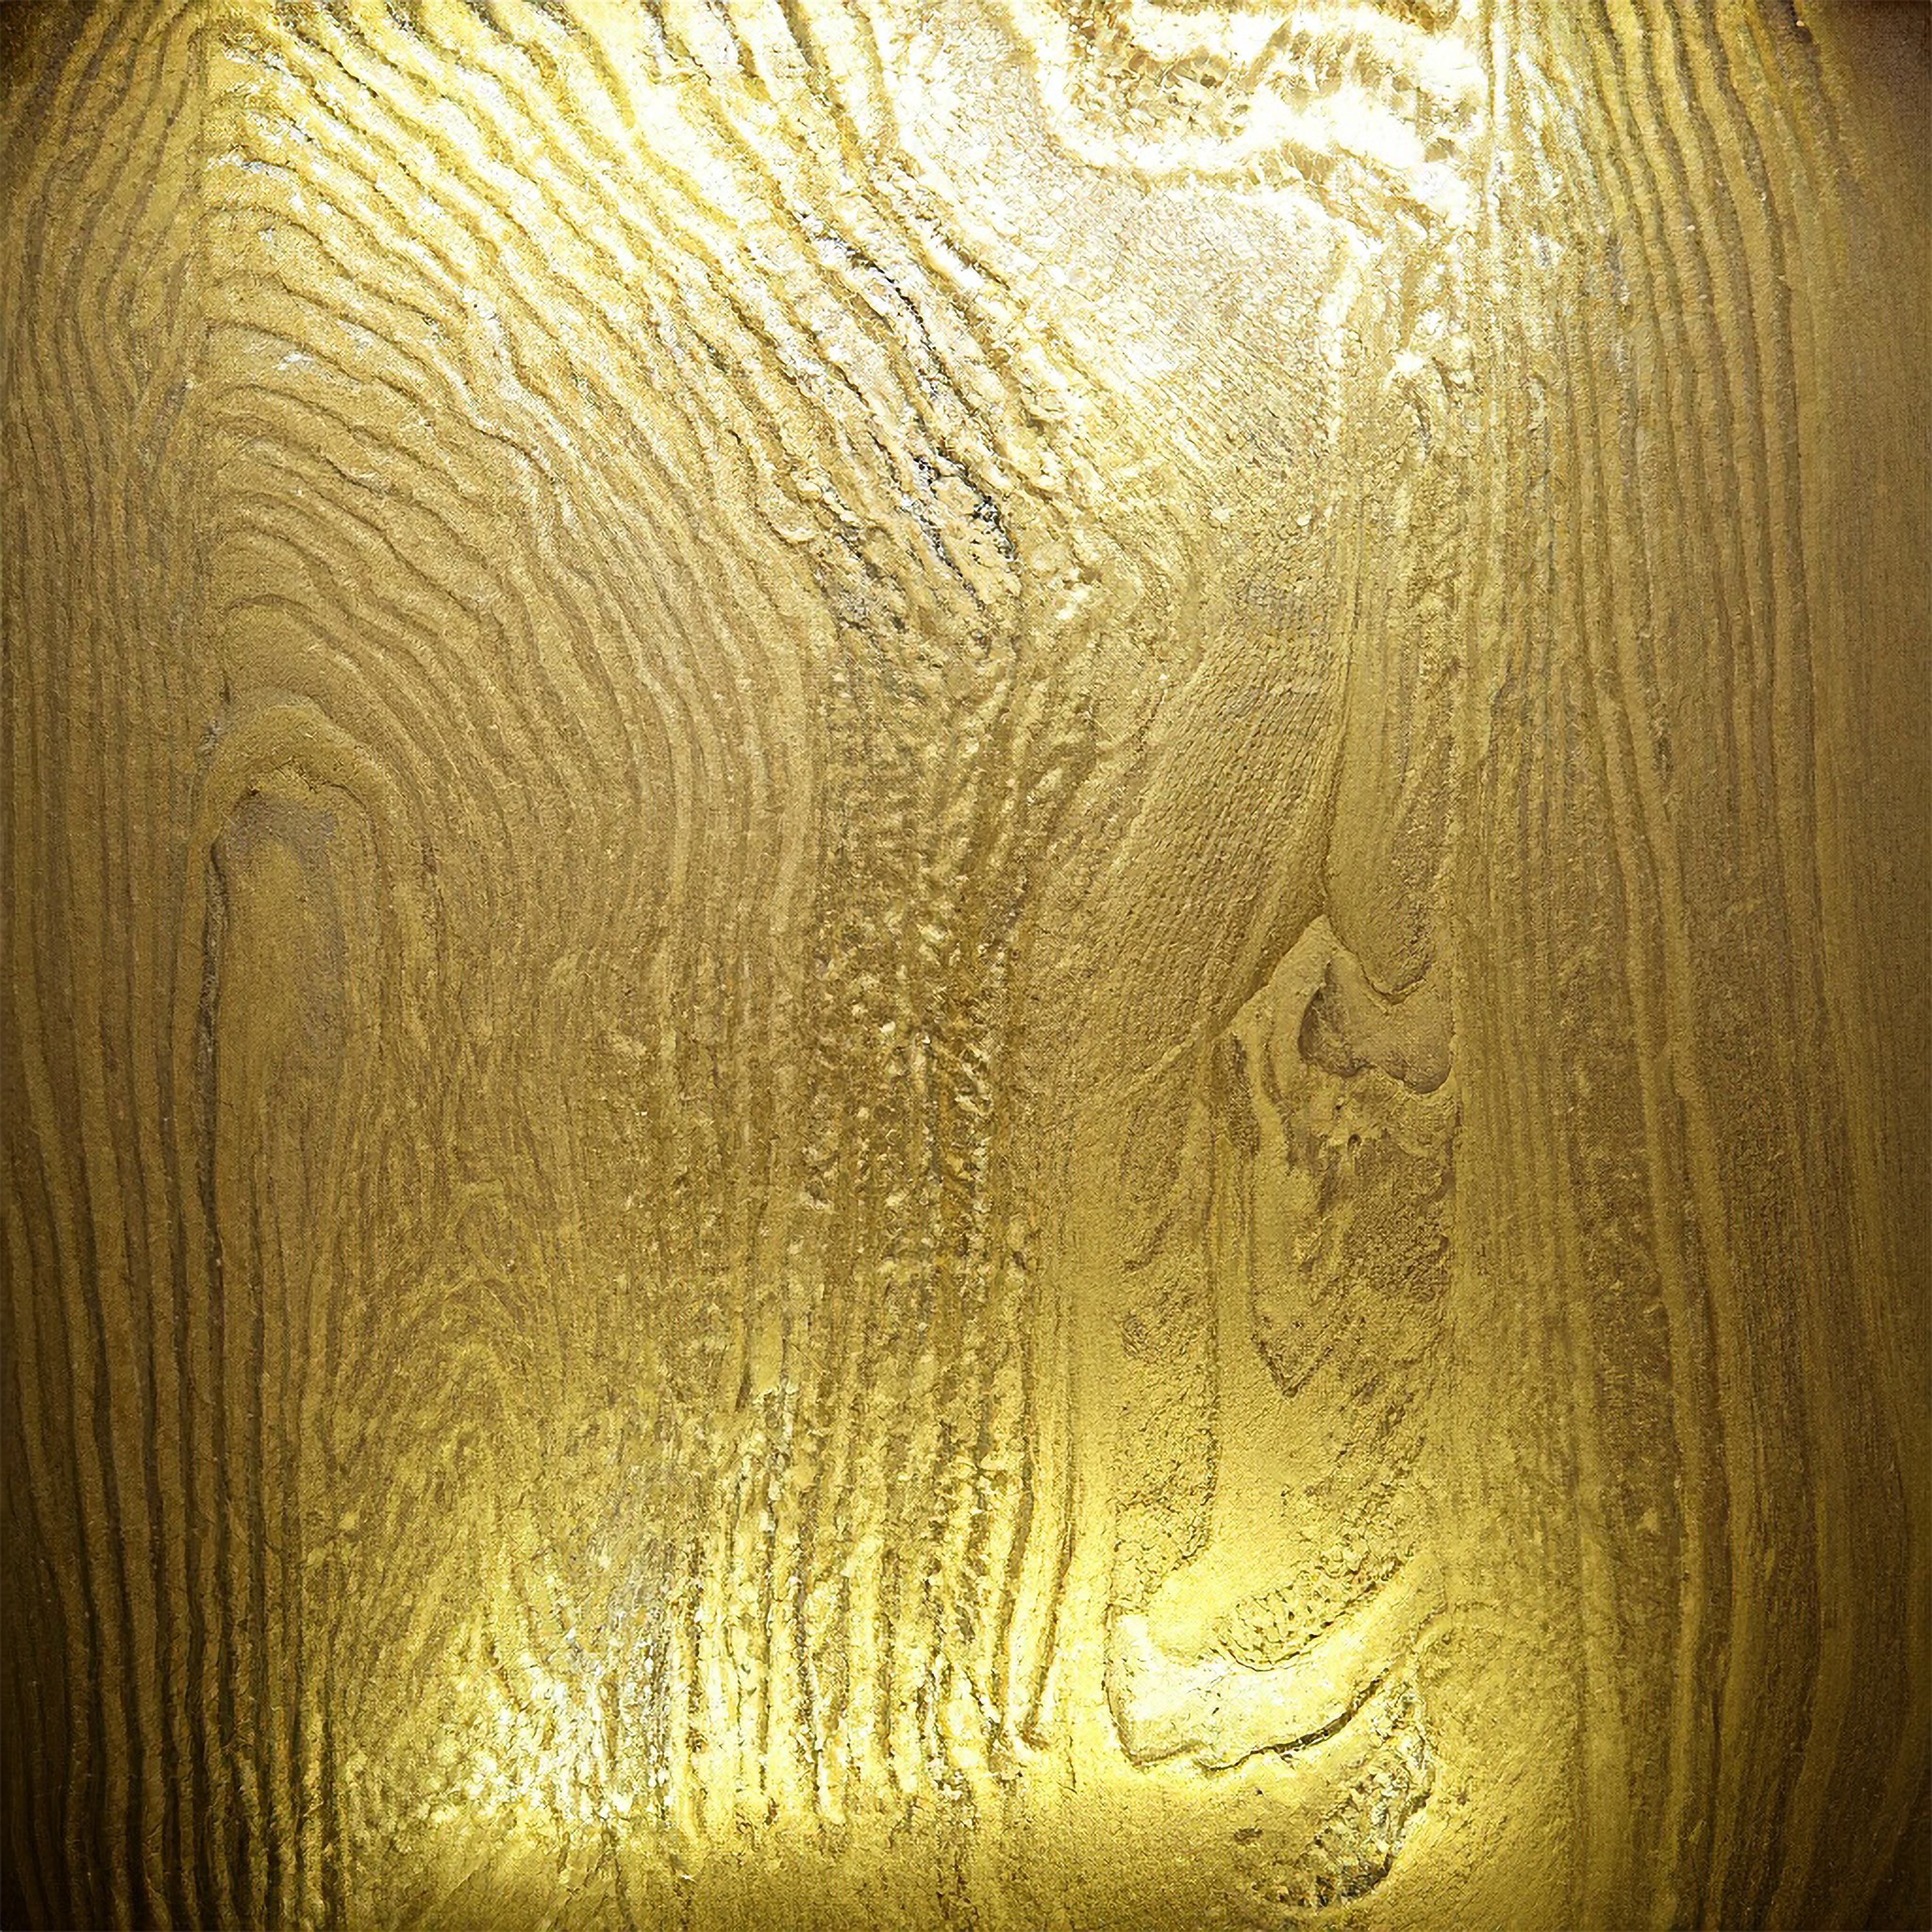 Abstract Gold wooden texture background